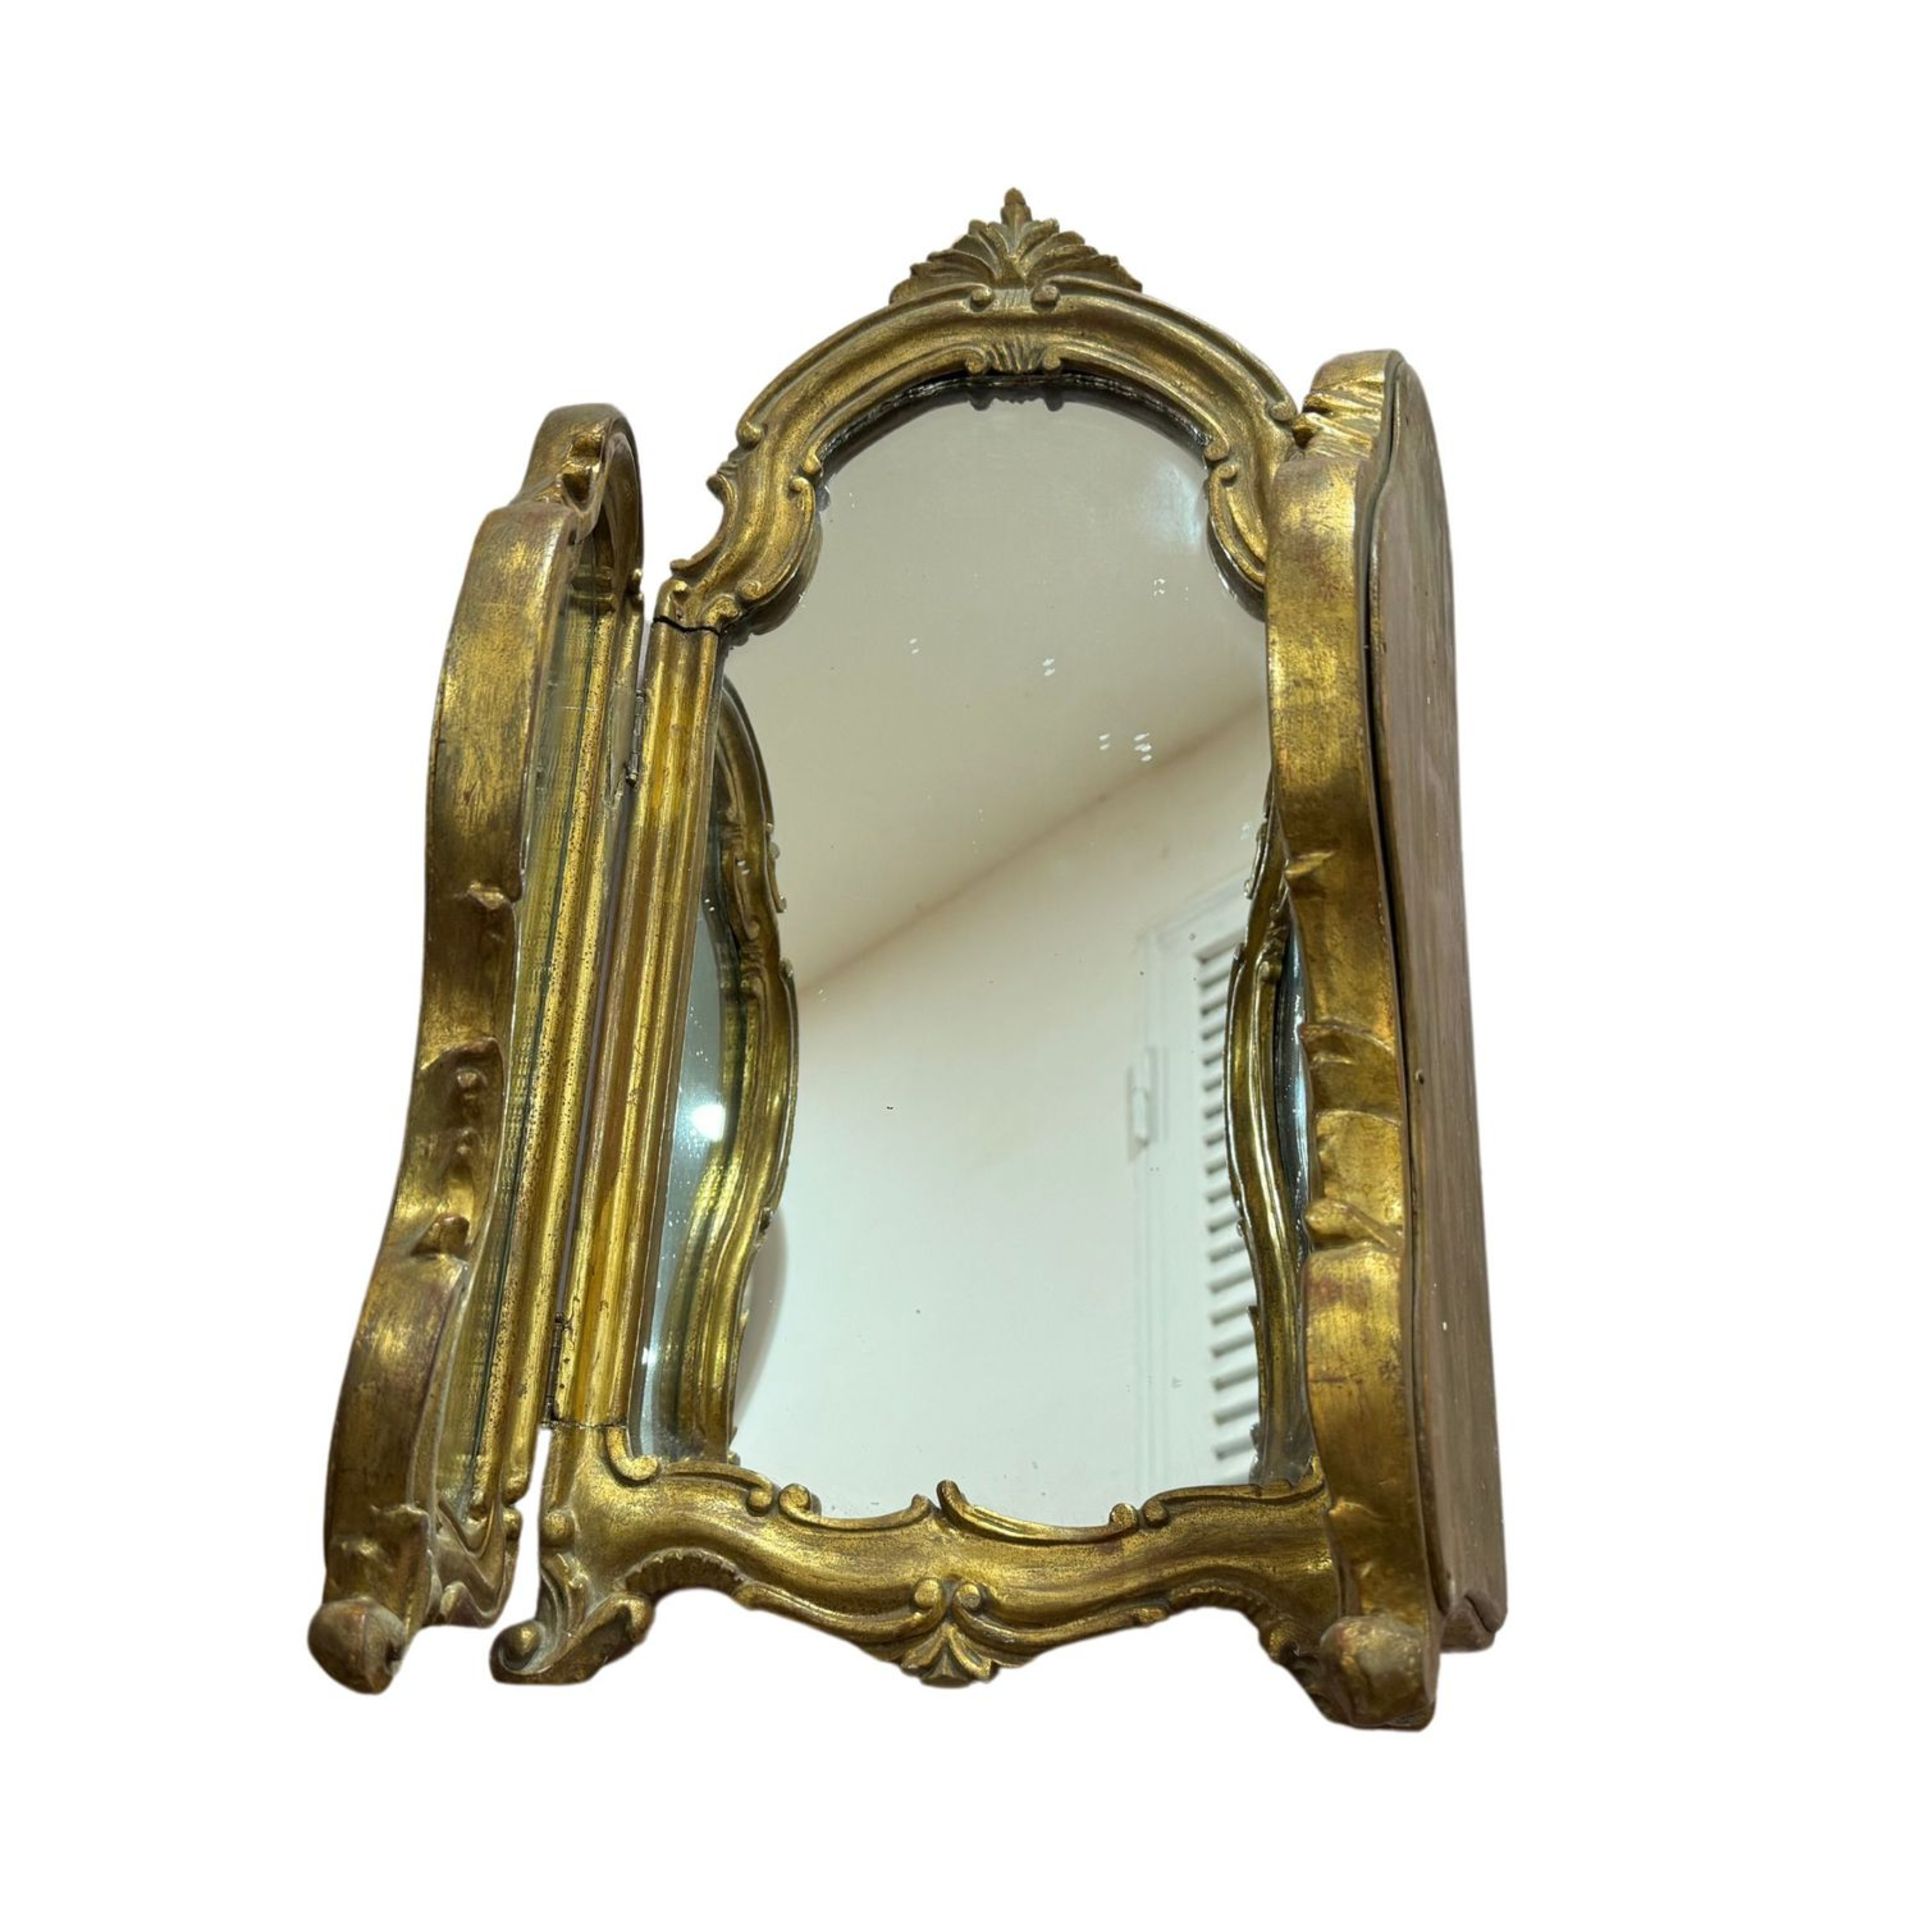 Trilateral gilded and carved wooden mirror - Image 2 of 6